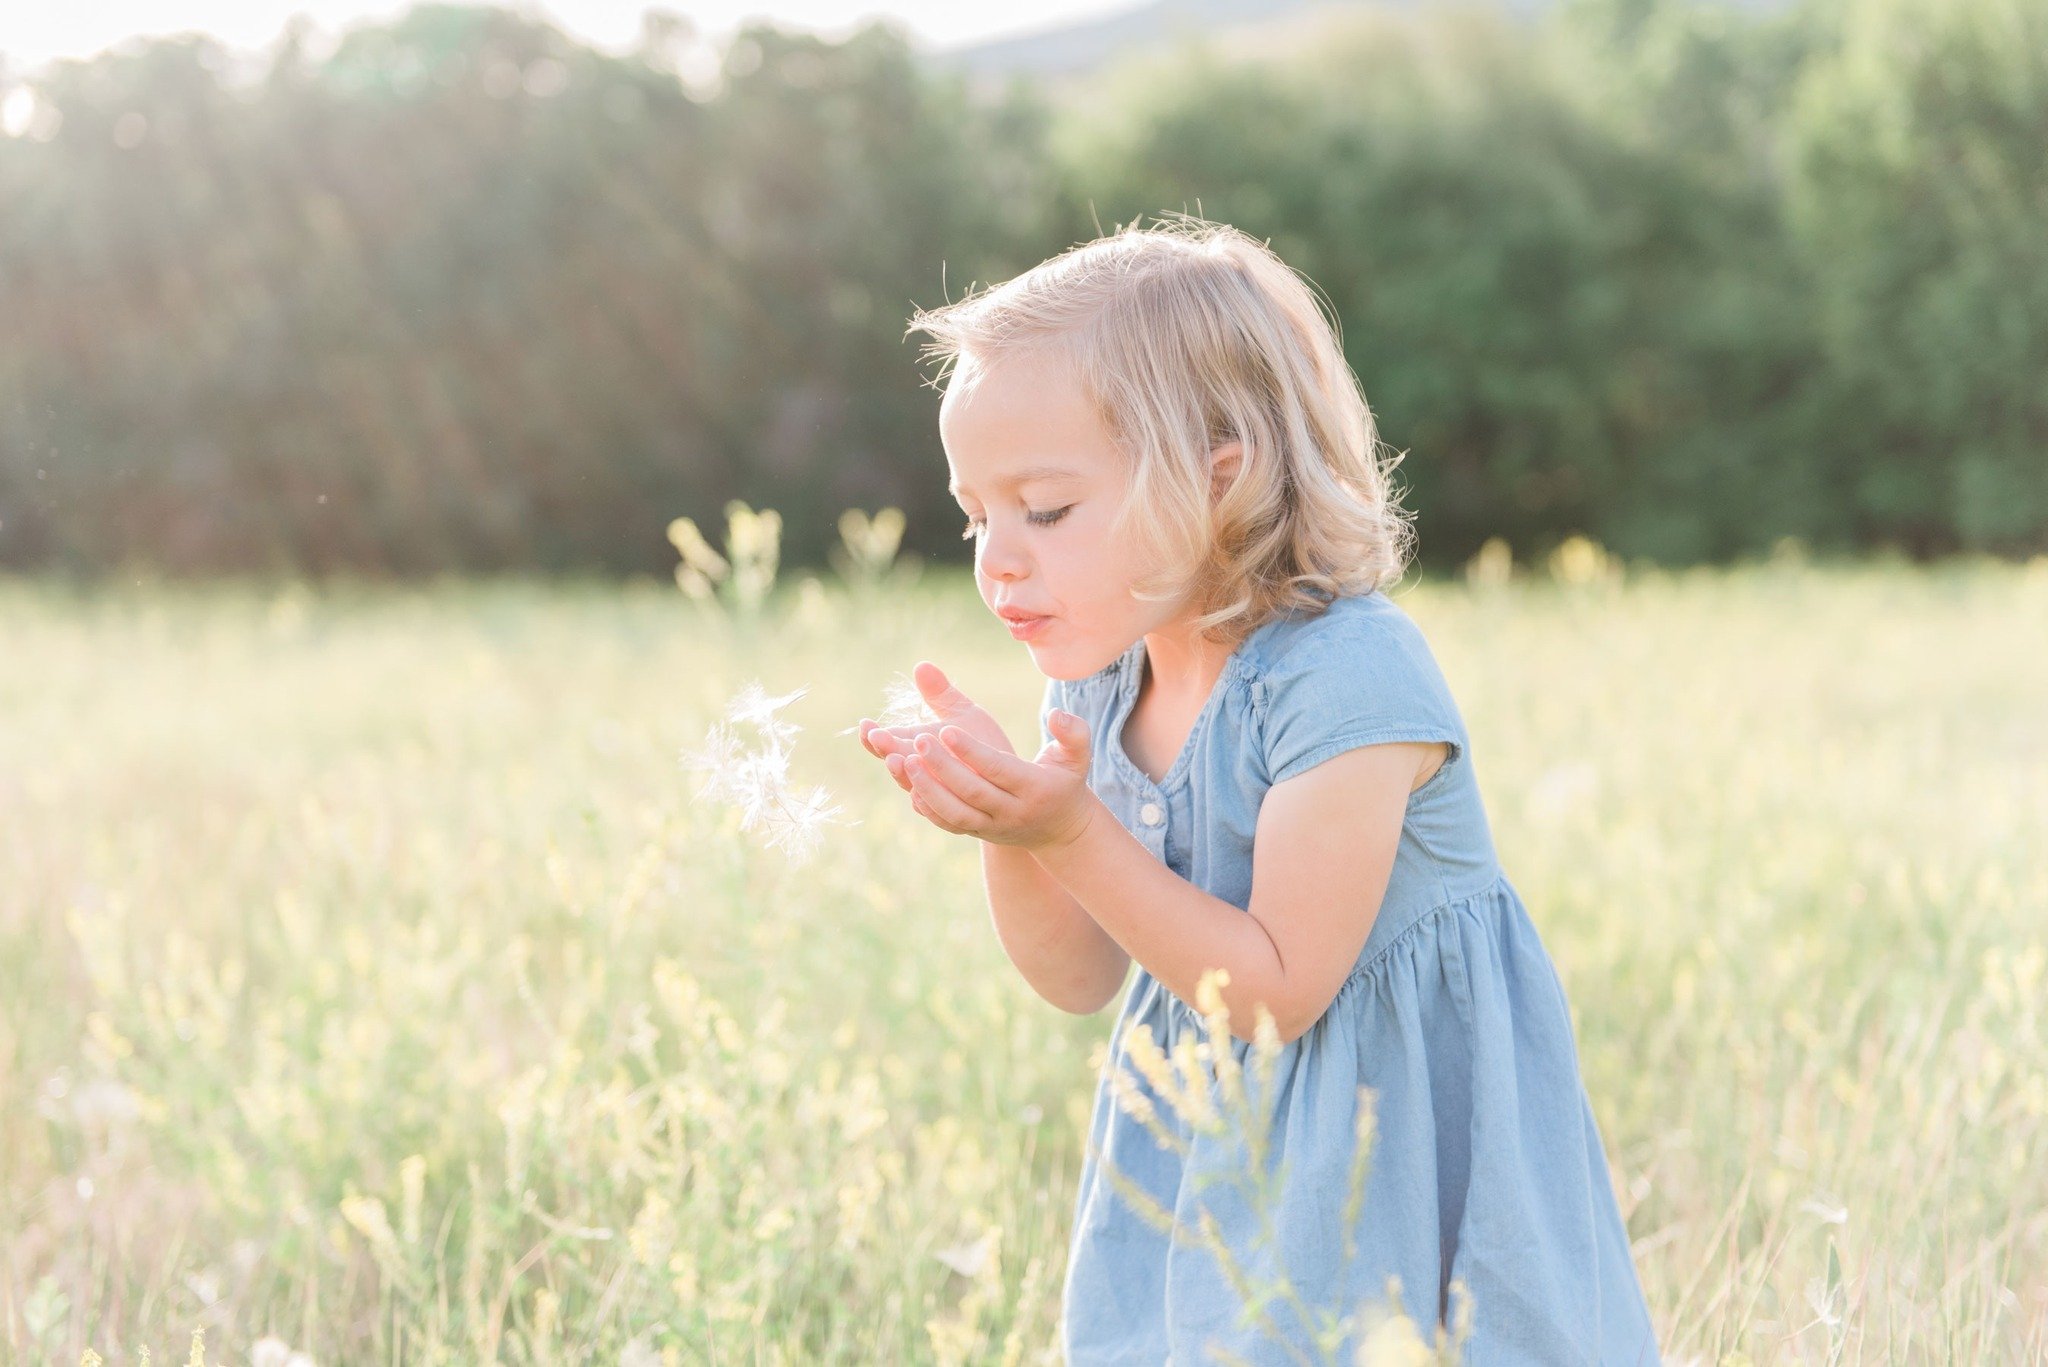 Moms, guess what? You don&rsquo;t need any fancy cameras or special occasions to capture amazing pictures of your kids as they hit new milestones. You can use whatever you have on hand to capture moments that you'll treasure forever. Whether it's you